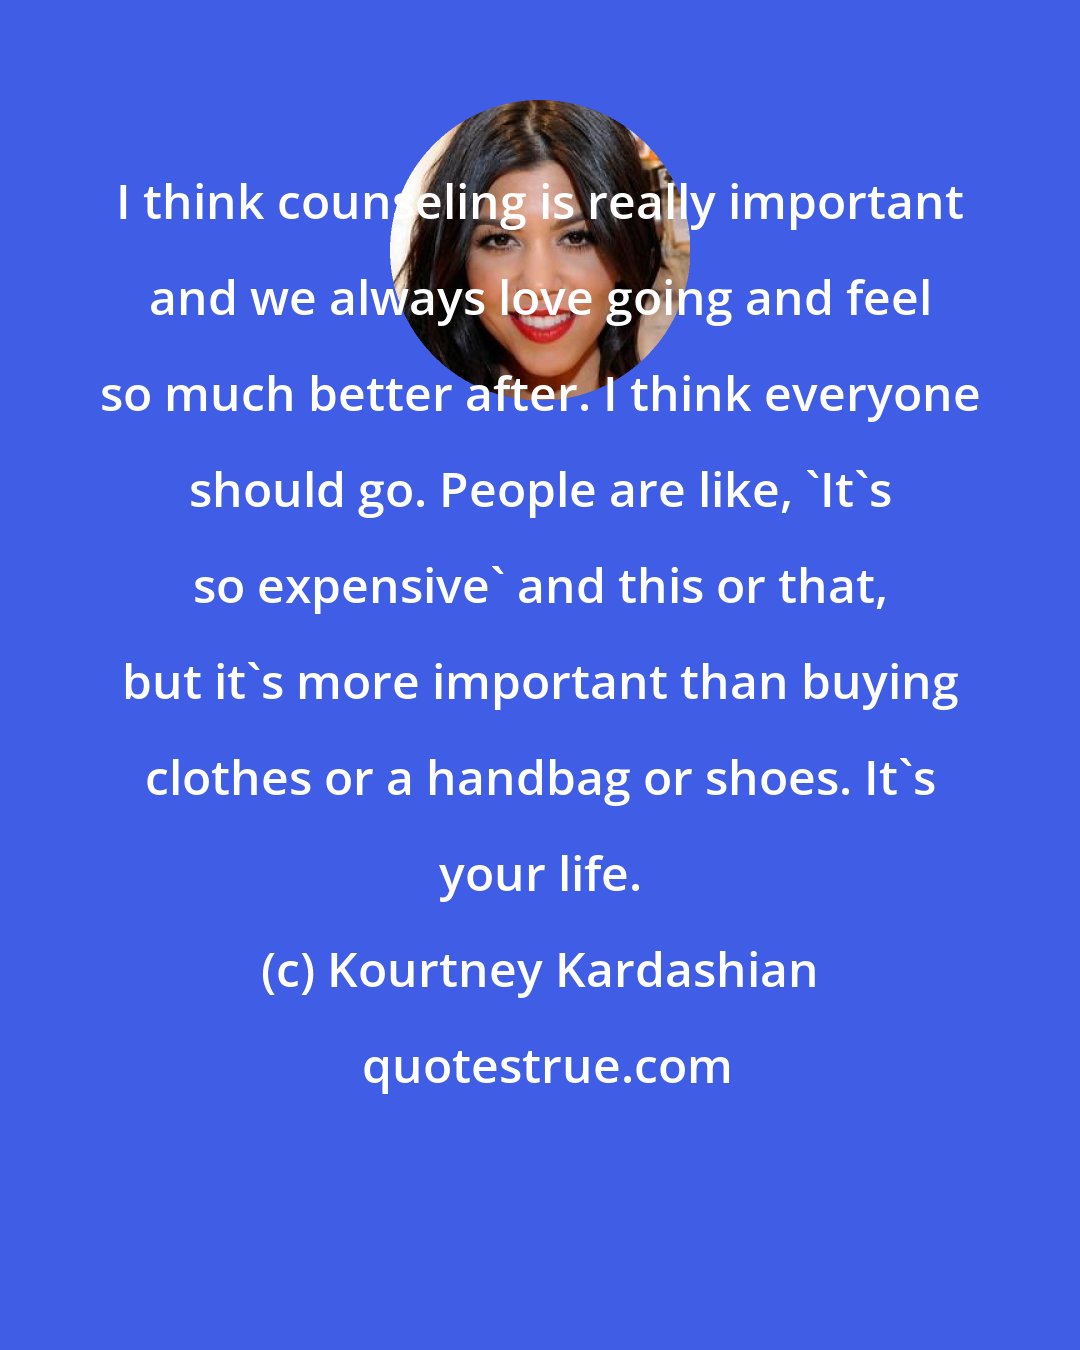 Kourtney Kardashian: I think counseling is really important and we always love going and feel so much better after. I think everyone should go. People are like, 'It's so expensive' and this or that, but it's more important than buying clothes or a handbag or shoes. It's your life.